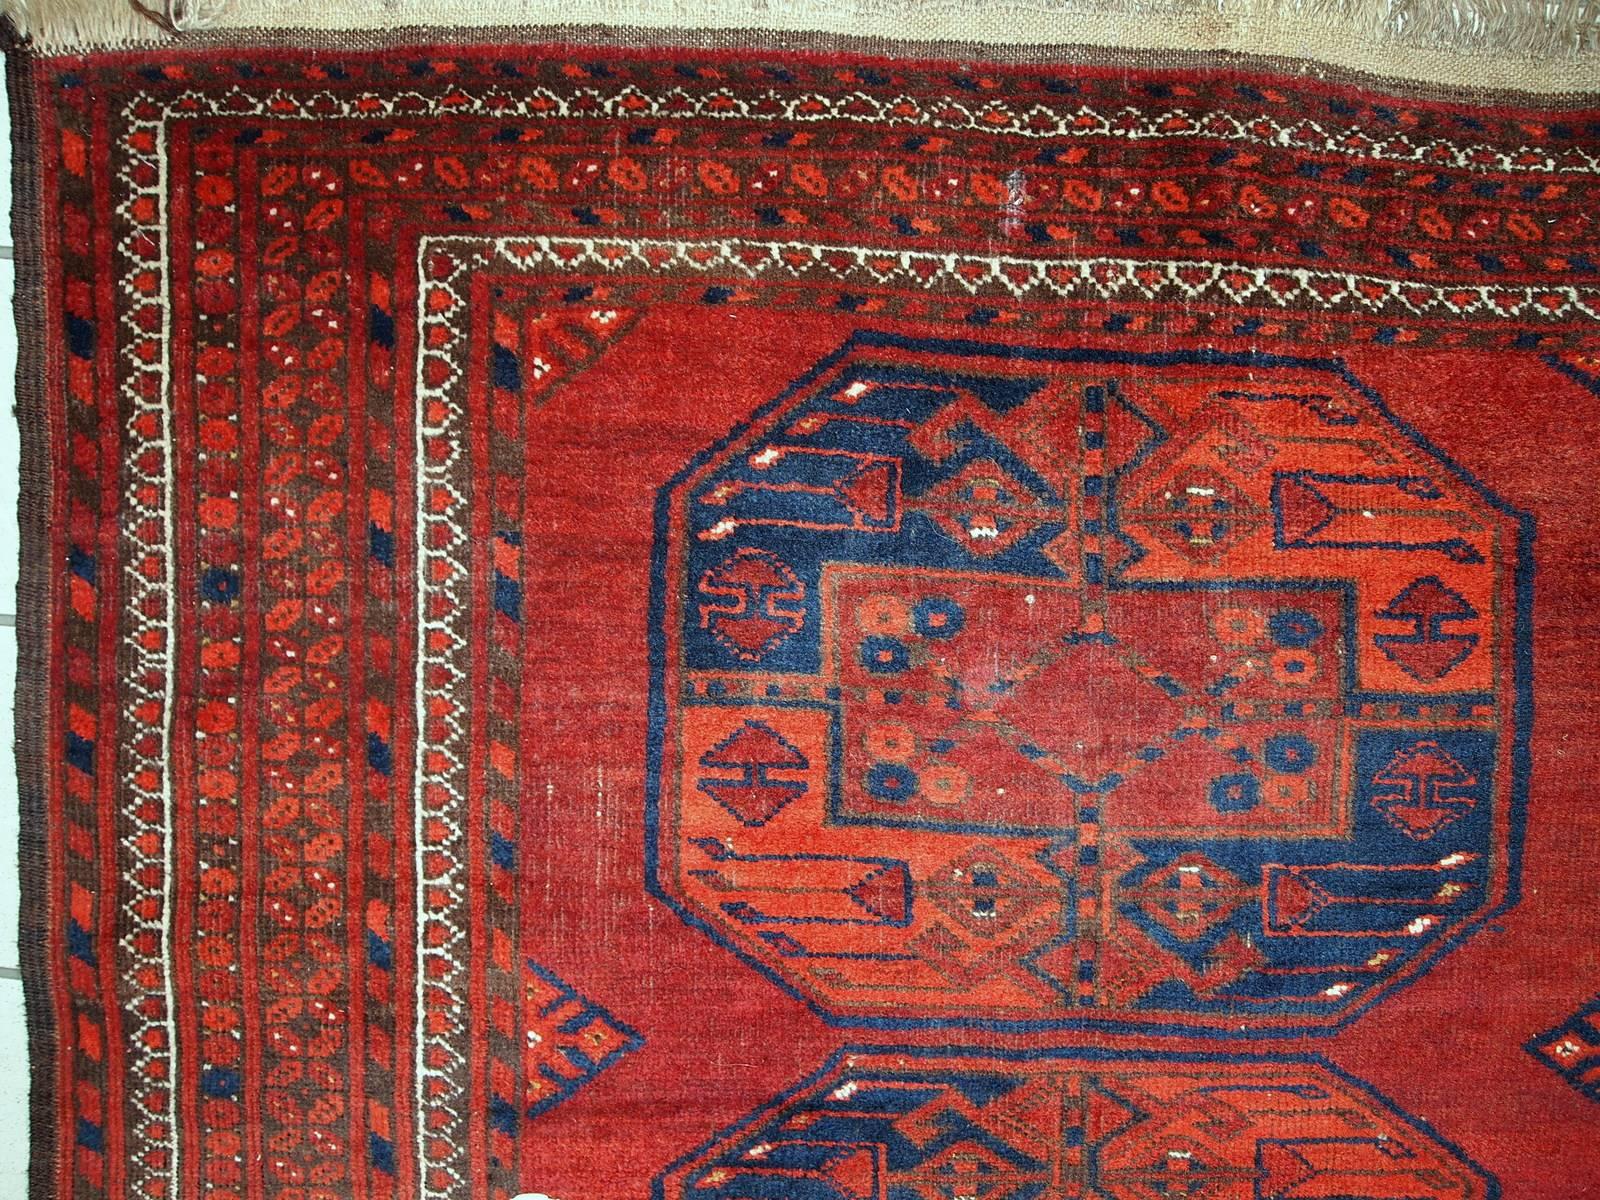 Antique Afghan Ersari rug in original good condition. The colors on this rug are typical Ersari shades: navy blue and bright red with some brown accents. The background has multiply large medallions along the lengths of the rug. Beautiful tribal